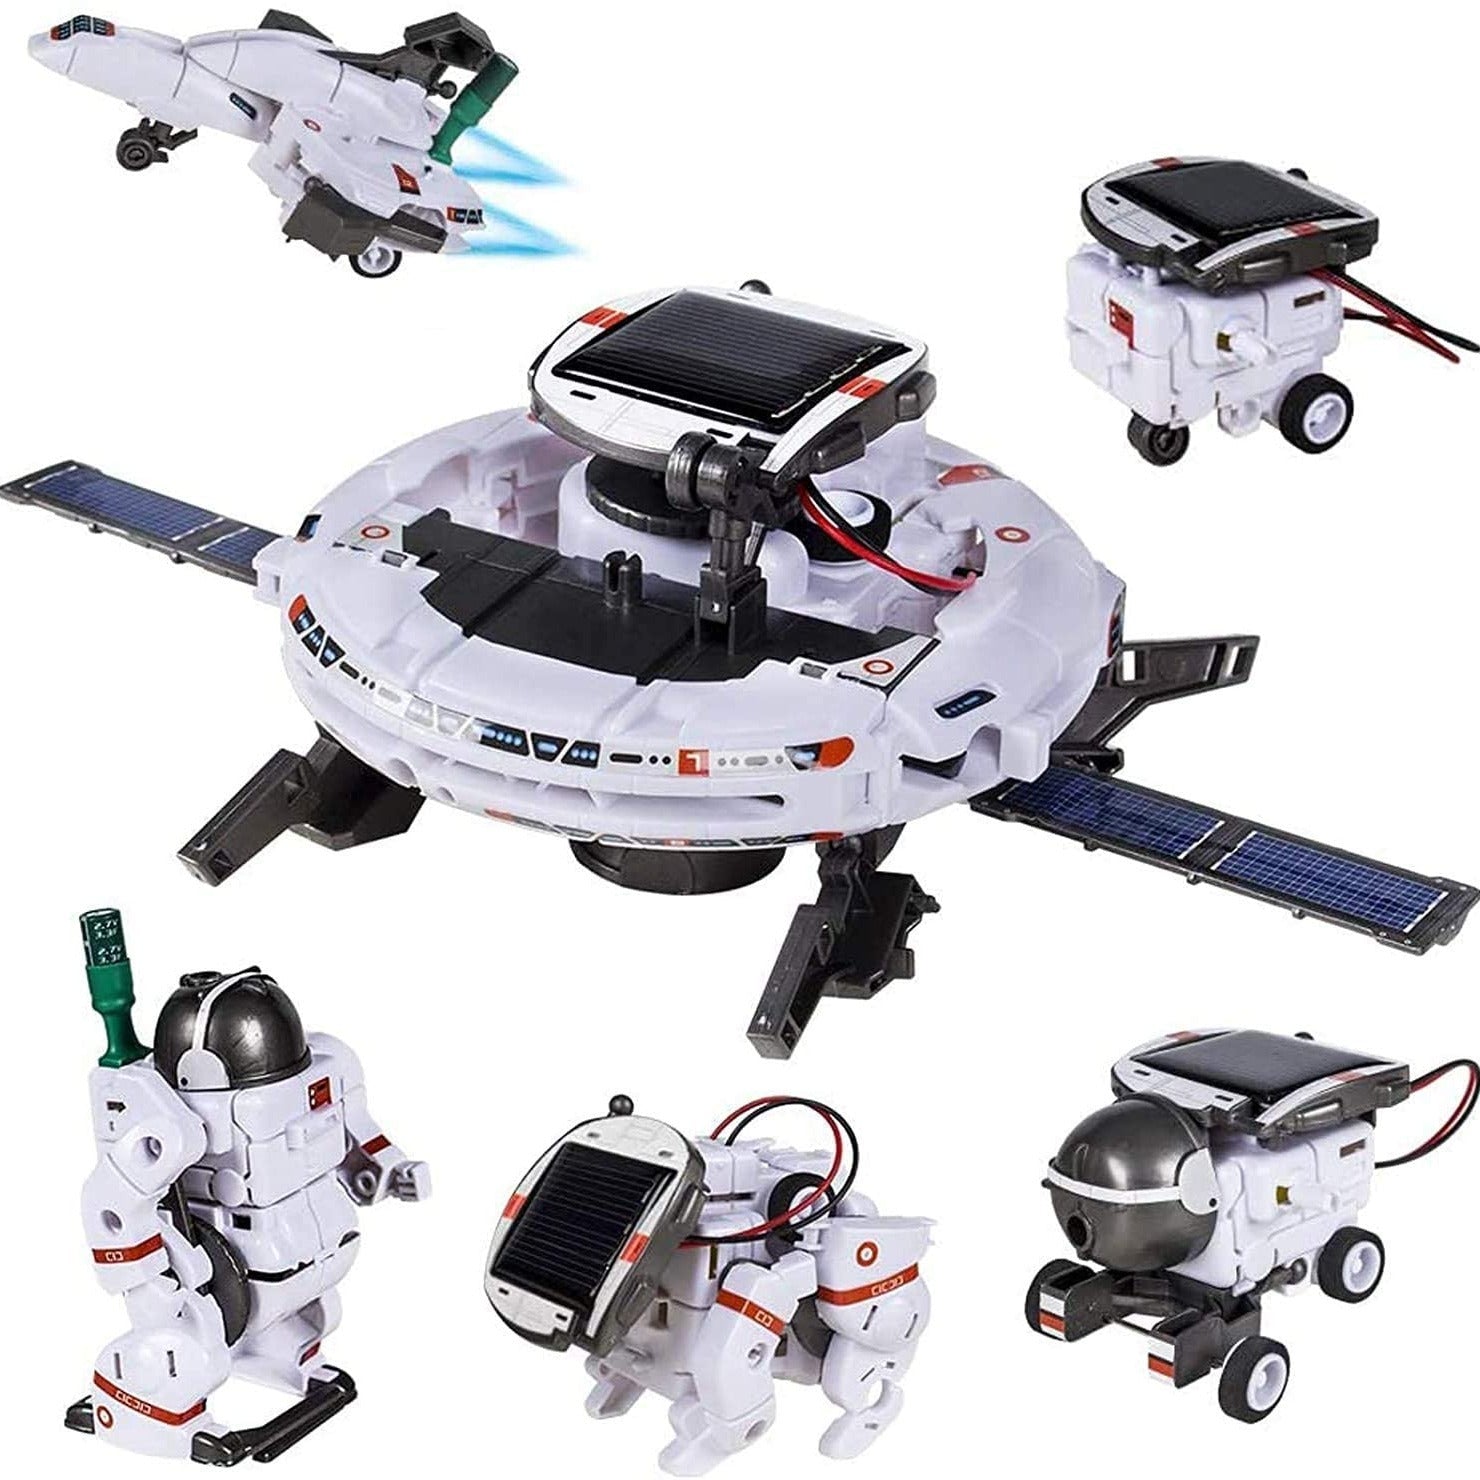 6-in-1 STEM Solar Robot Kit Toys Gifts, Educational Building Science Experiment Set Cykapu